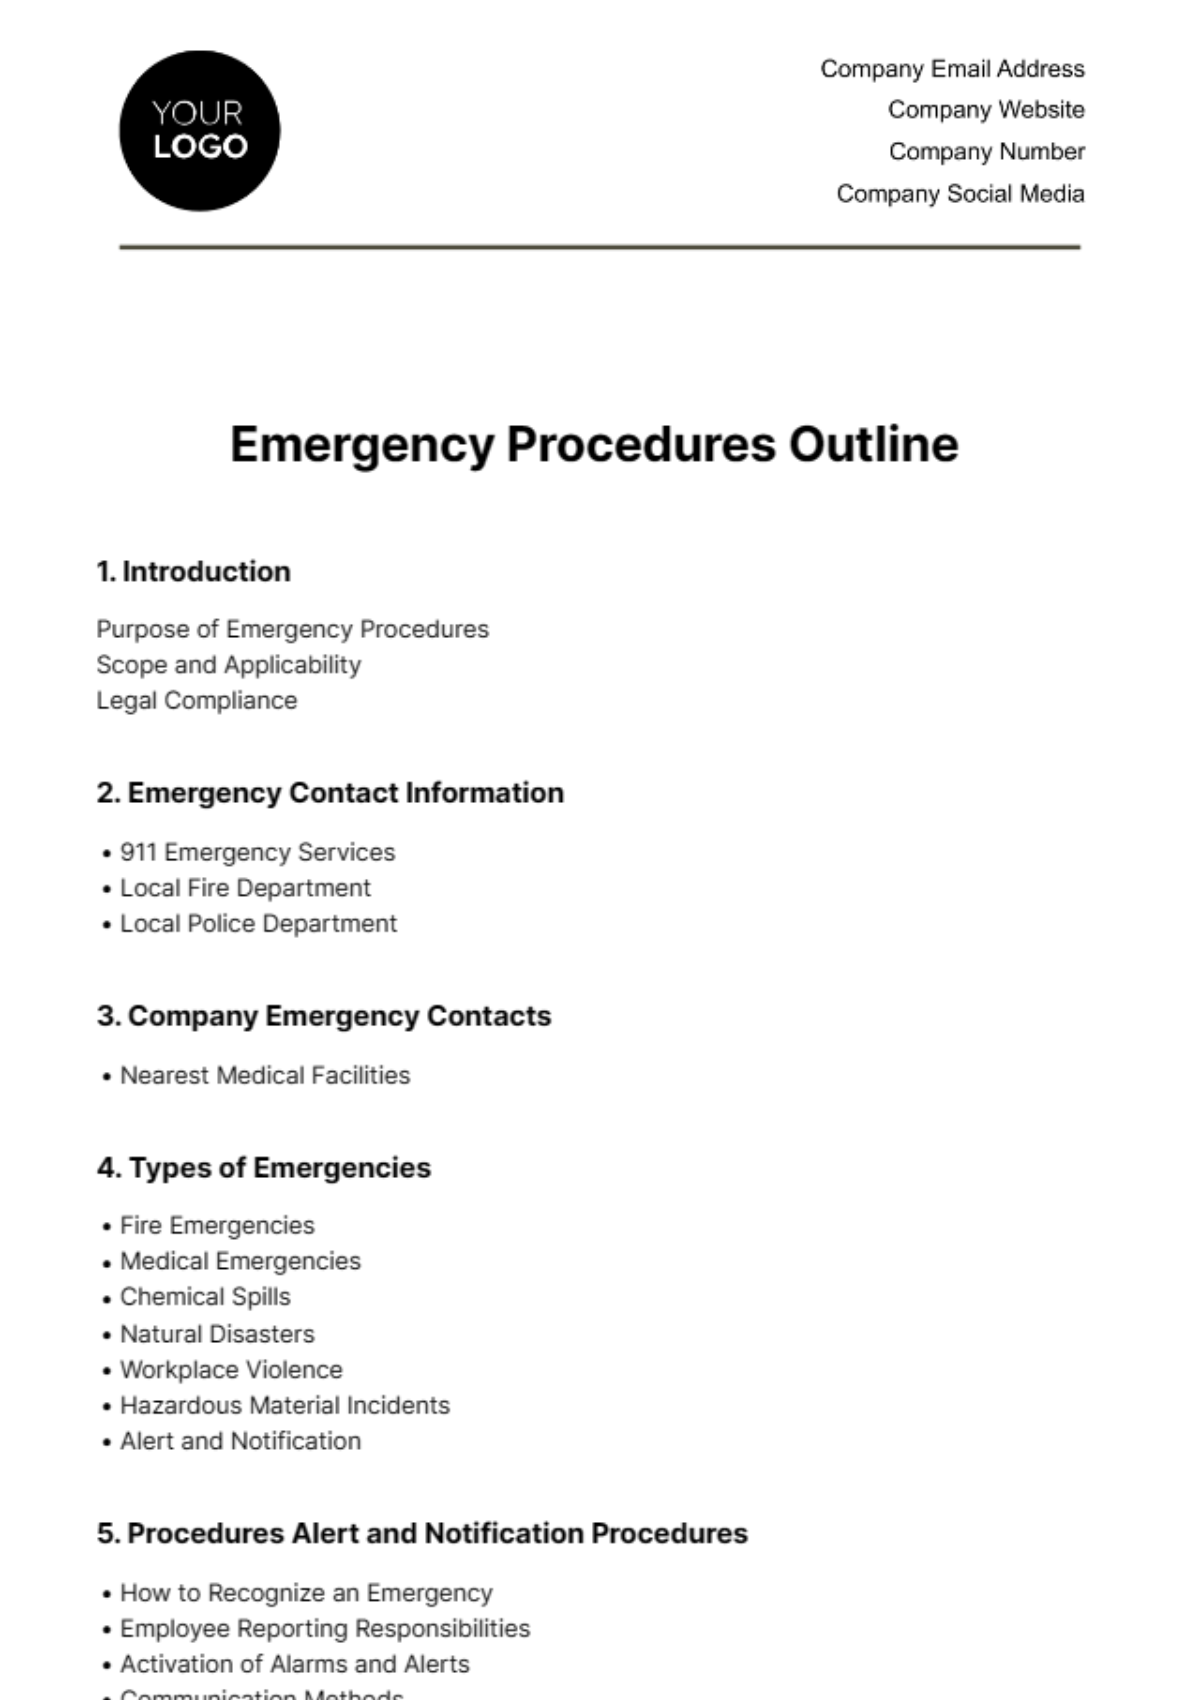 Free Emergency Procedures Outline Template